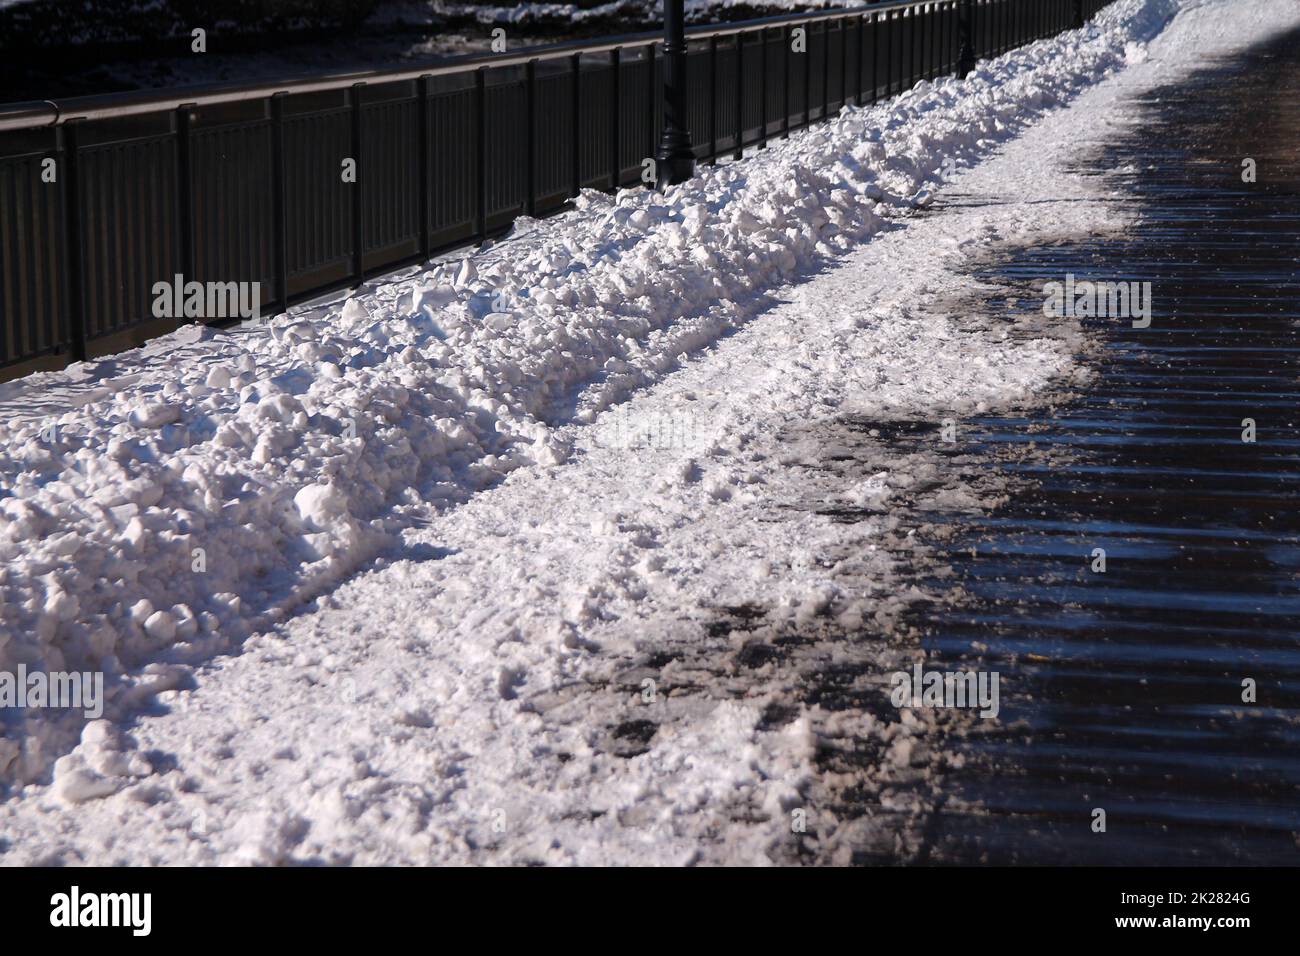 The fresh snow on the wooden walkaway in a sunny winter day Stock Photo